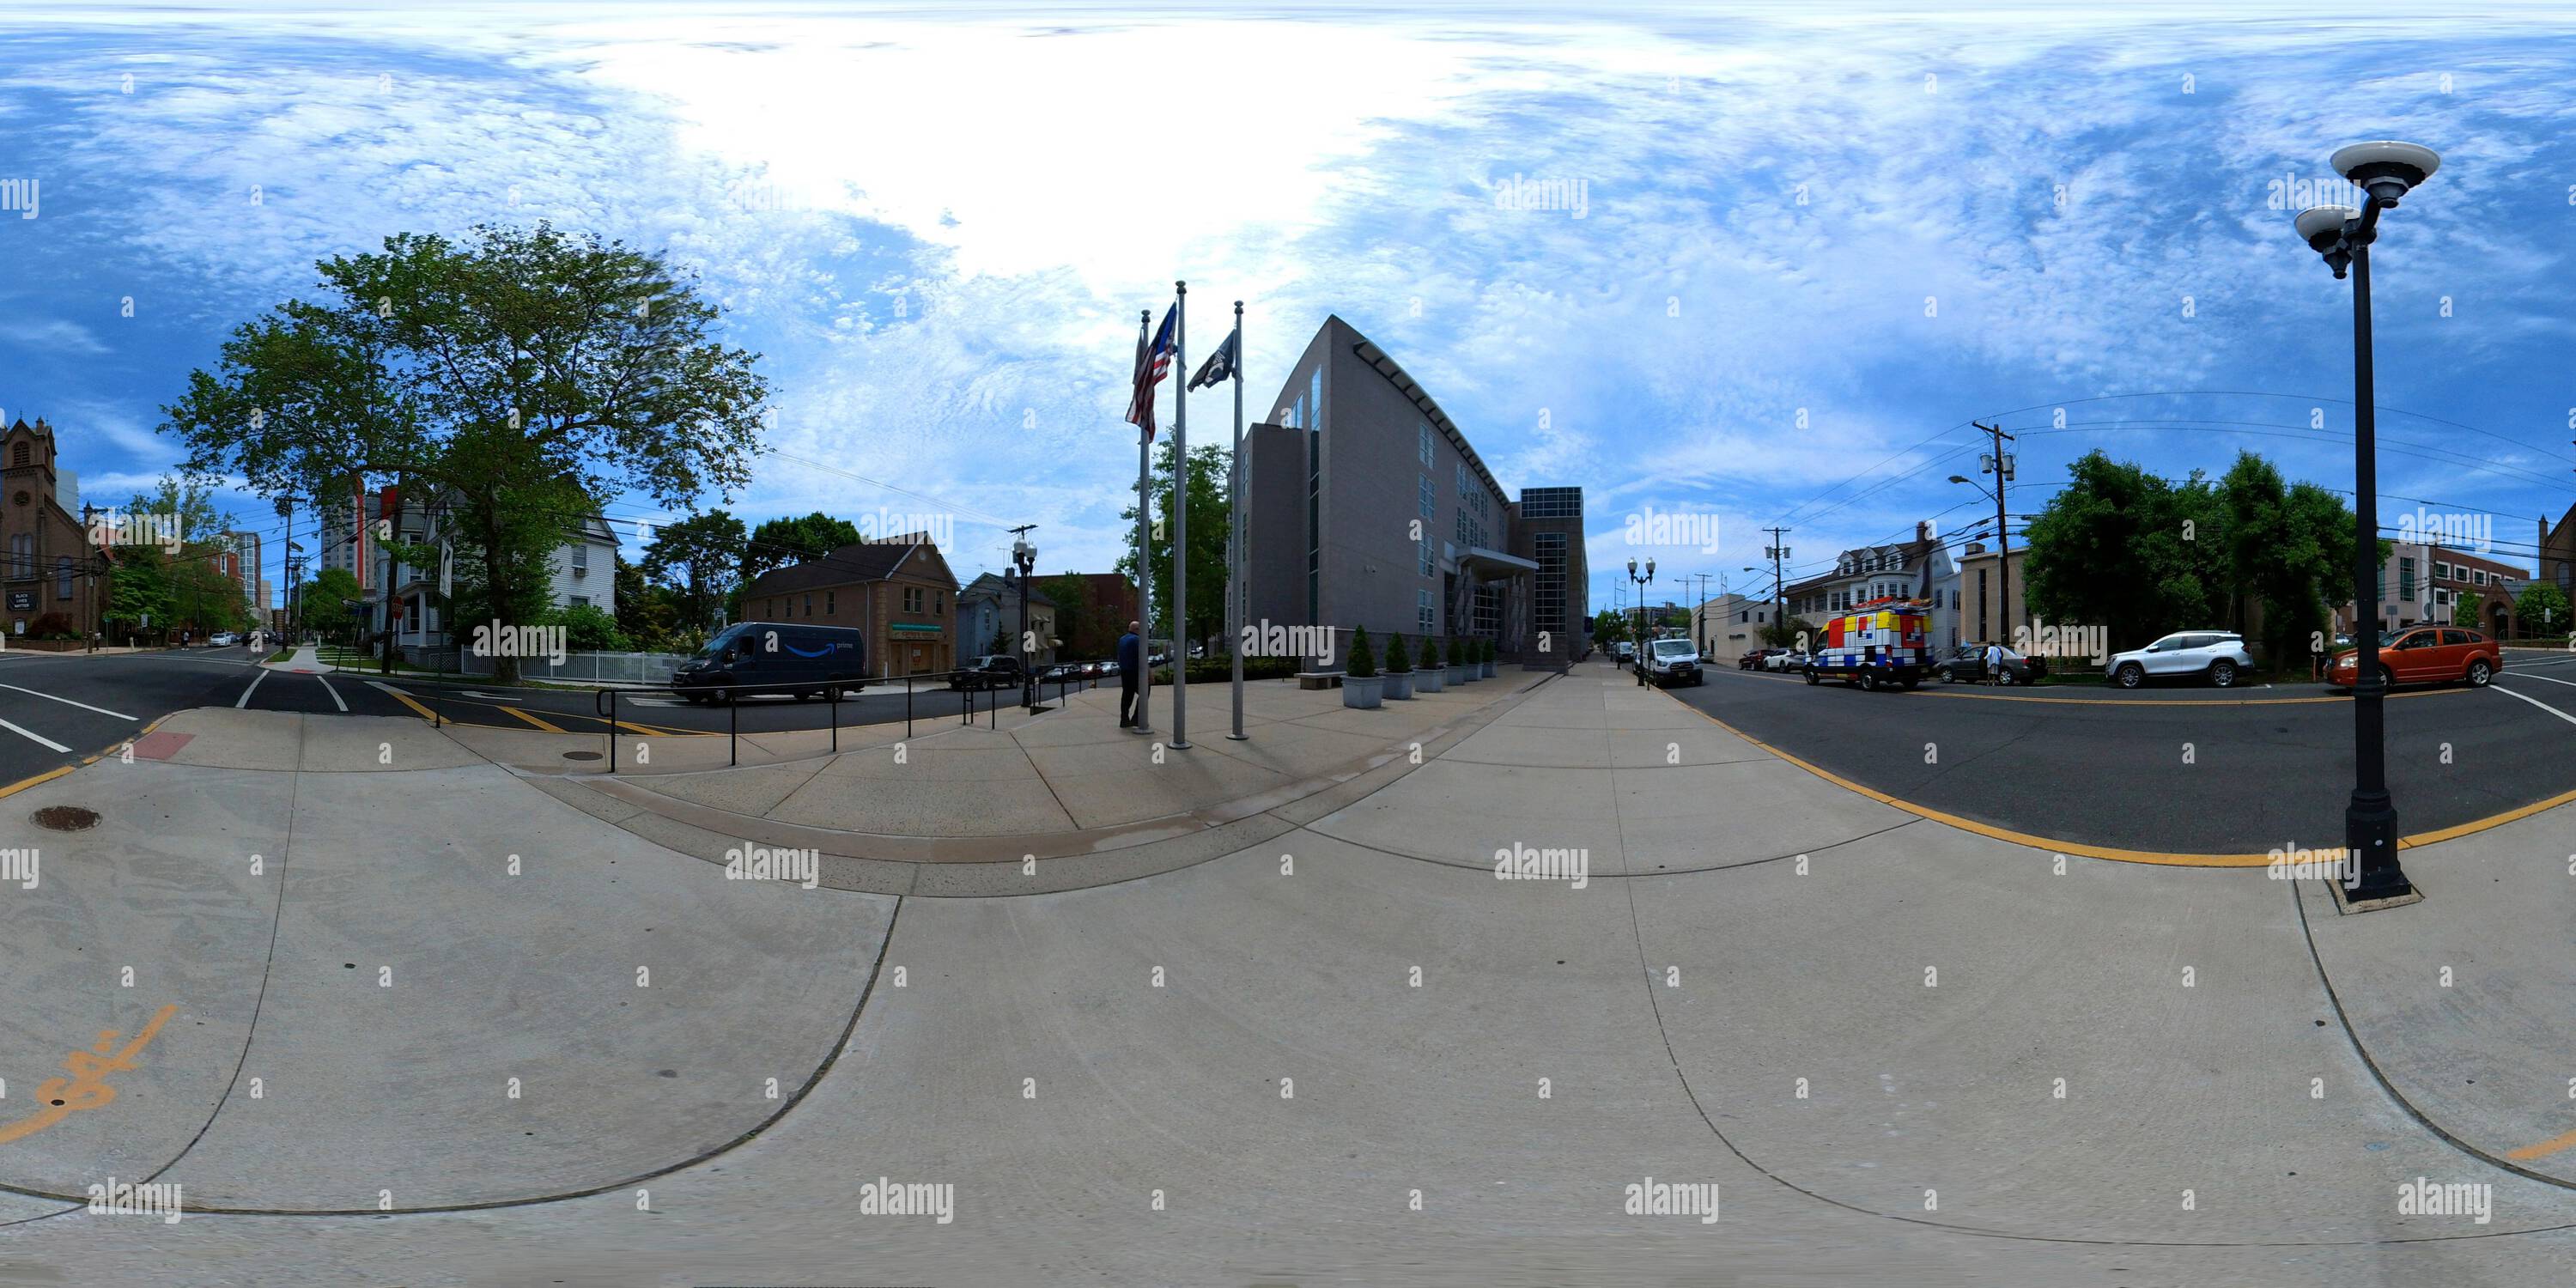 360 degree panoramic view of In front of the Middlesex County Family Courthouse in New Brunswick, NJ